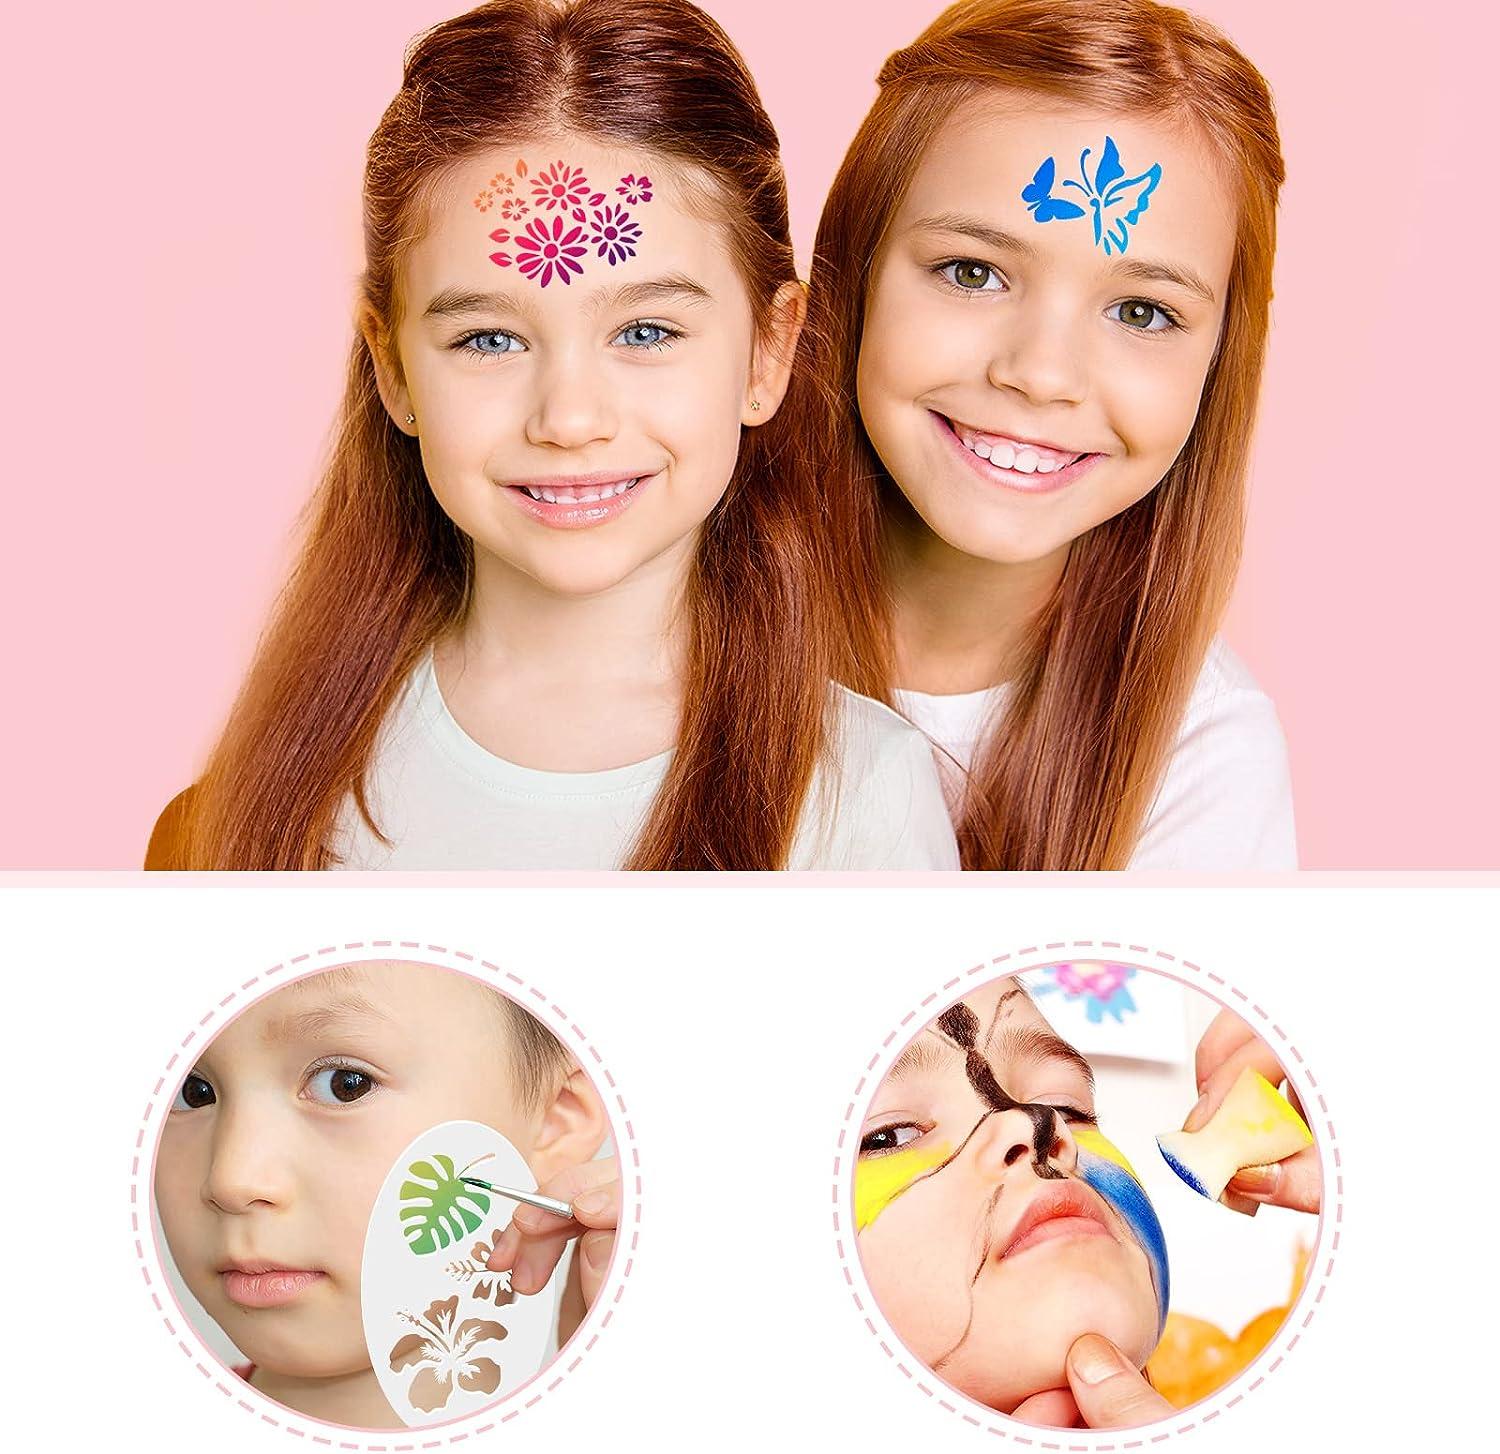 Face Painting Stencils Mermaid Makeup Face Paint Stencils Halloween Body  Art Supplies Tracing Tattoo Templates for Kids Adults Parties Makeup (39  face